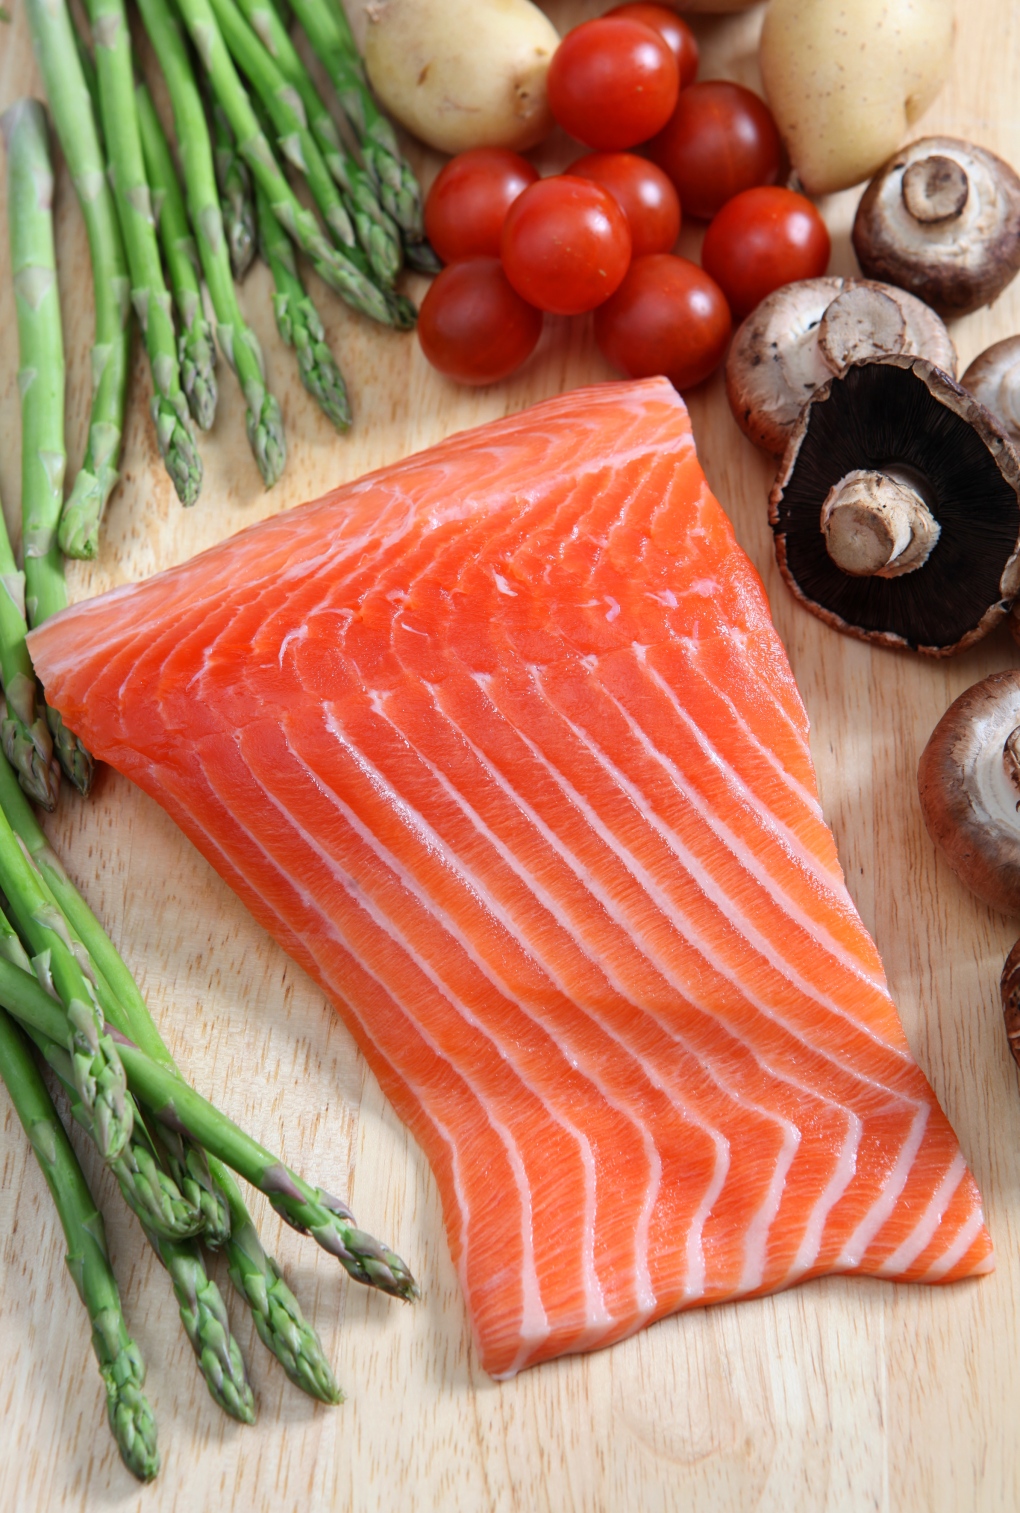 Eating some fish during pregnancy can curb anxiety